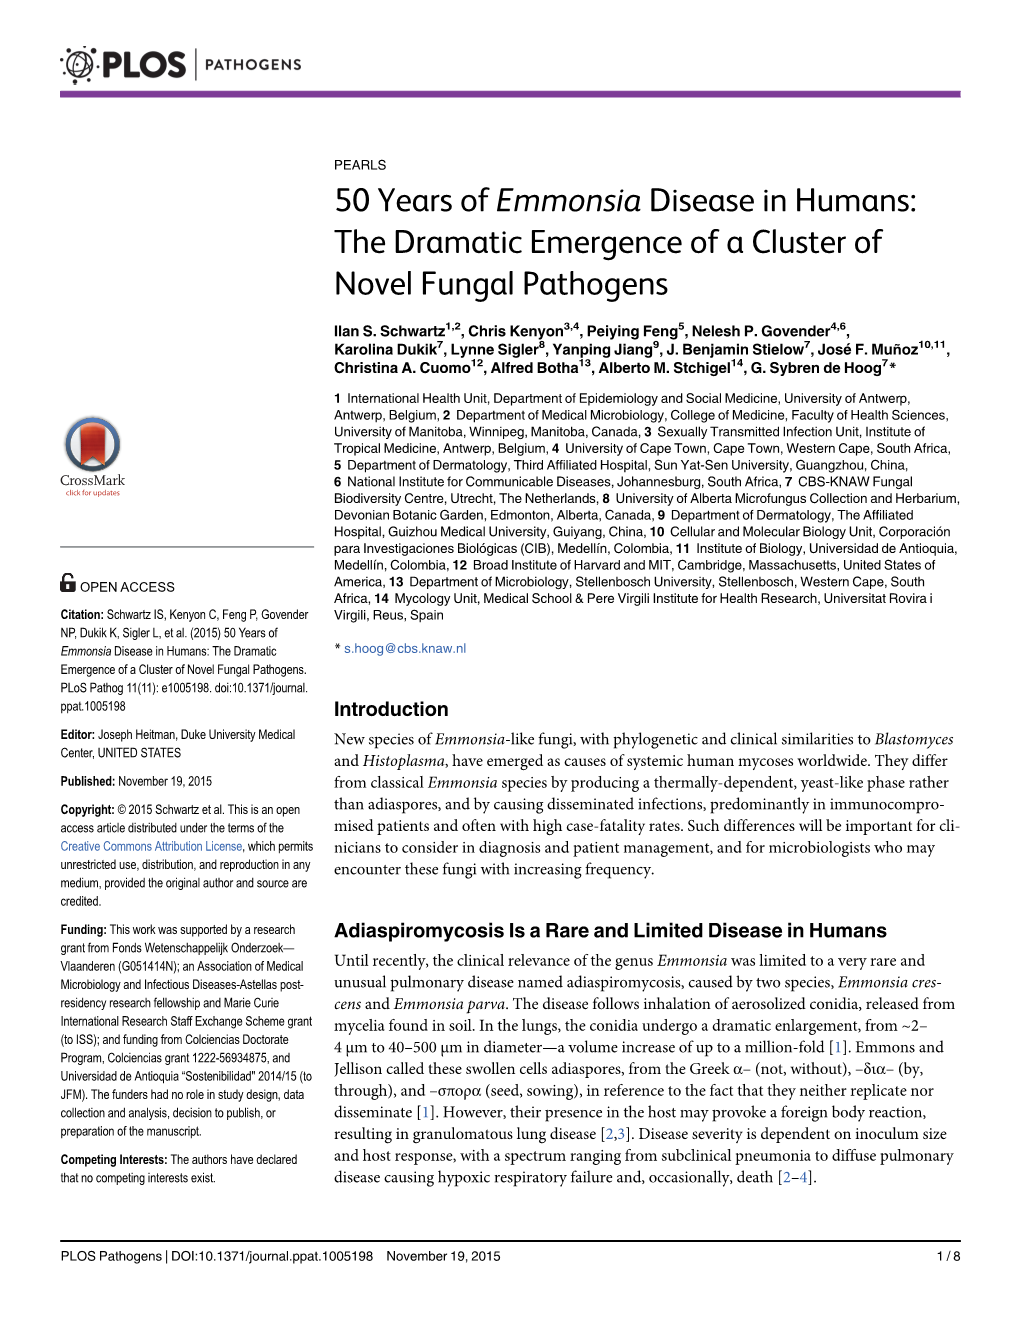 50 Years of Emmonsia Disease in Humans: the Dramatic Emergence of a Cluster of Novel Fungal Pathogens